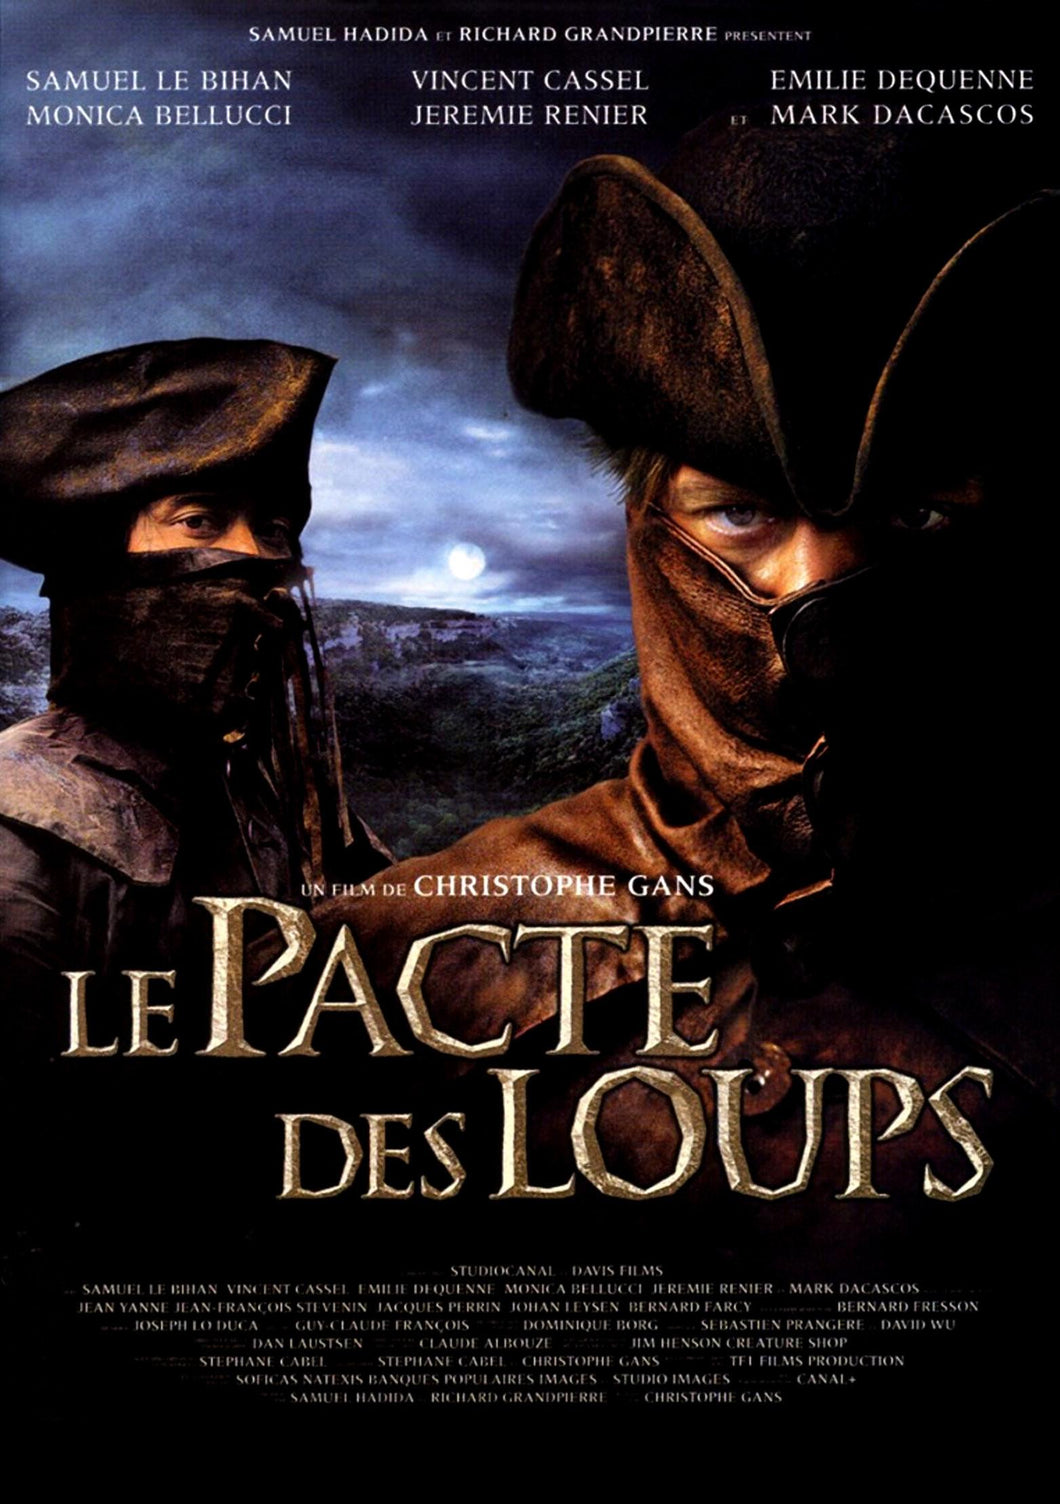 Le Pacte Des Loups Movie Poster Framed or Unframed Glossy Poster Free UK Shipping!!!